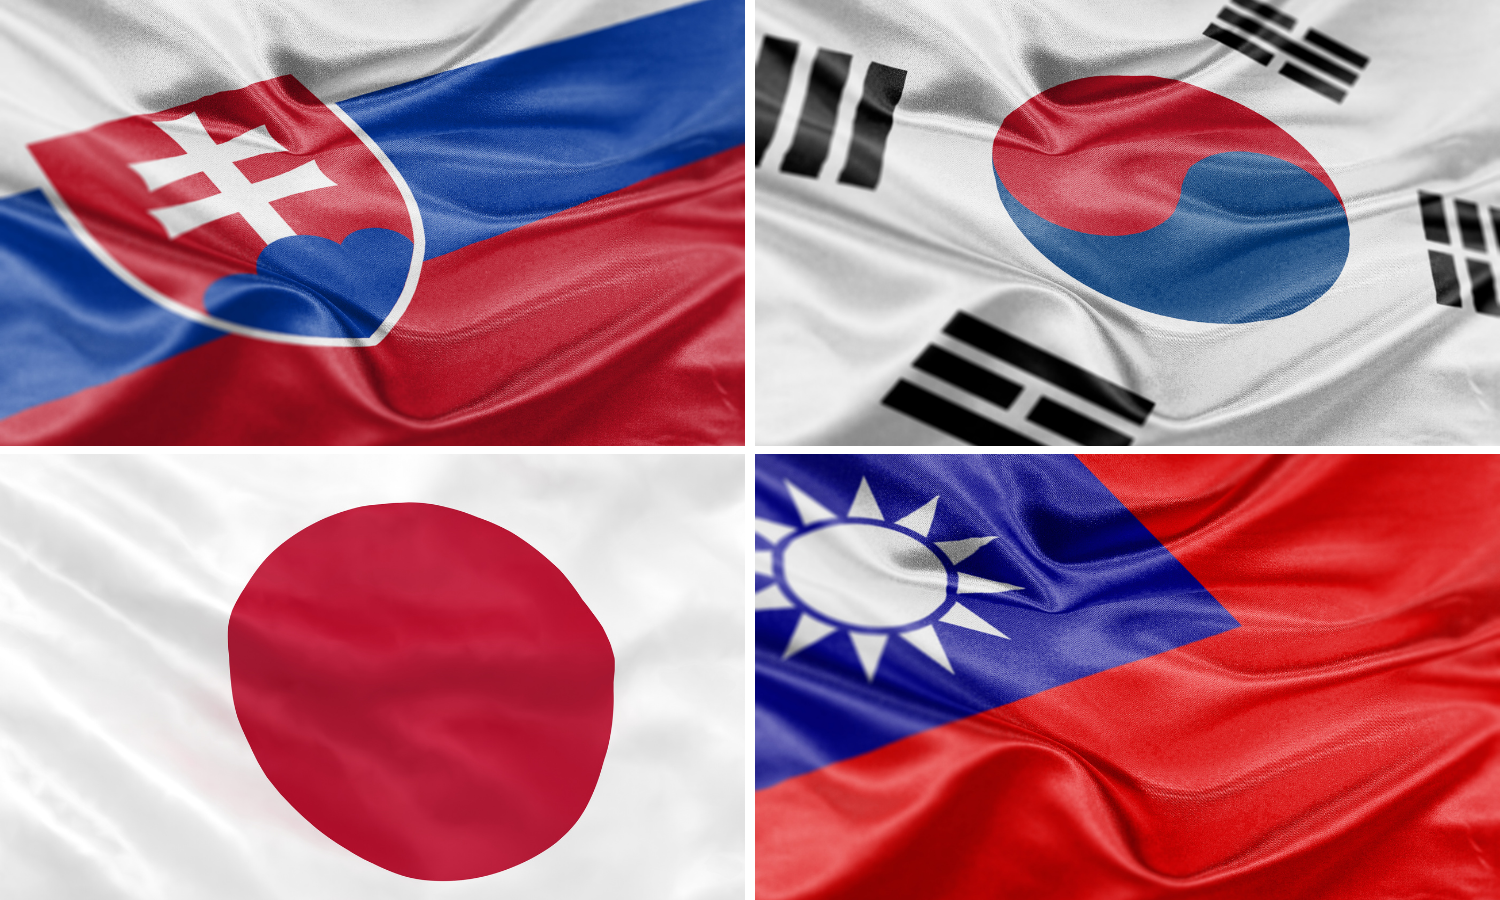 Slovakia and the democracies of ‎Northeast Asia: Partnerships rooted in values